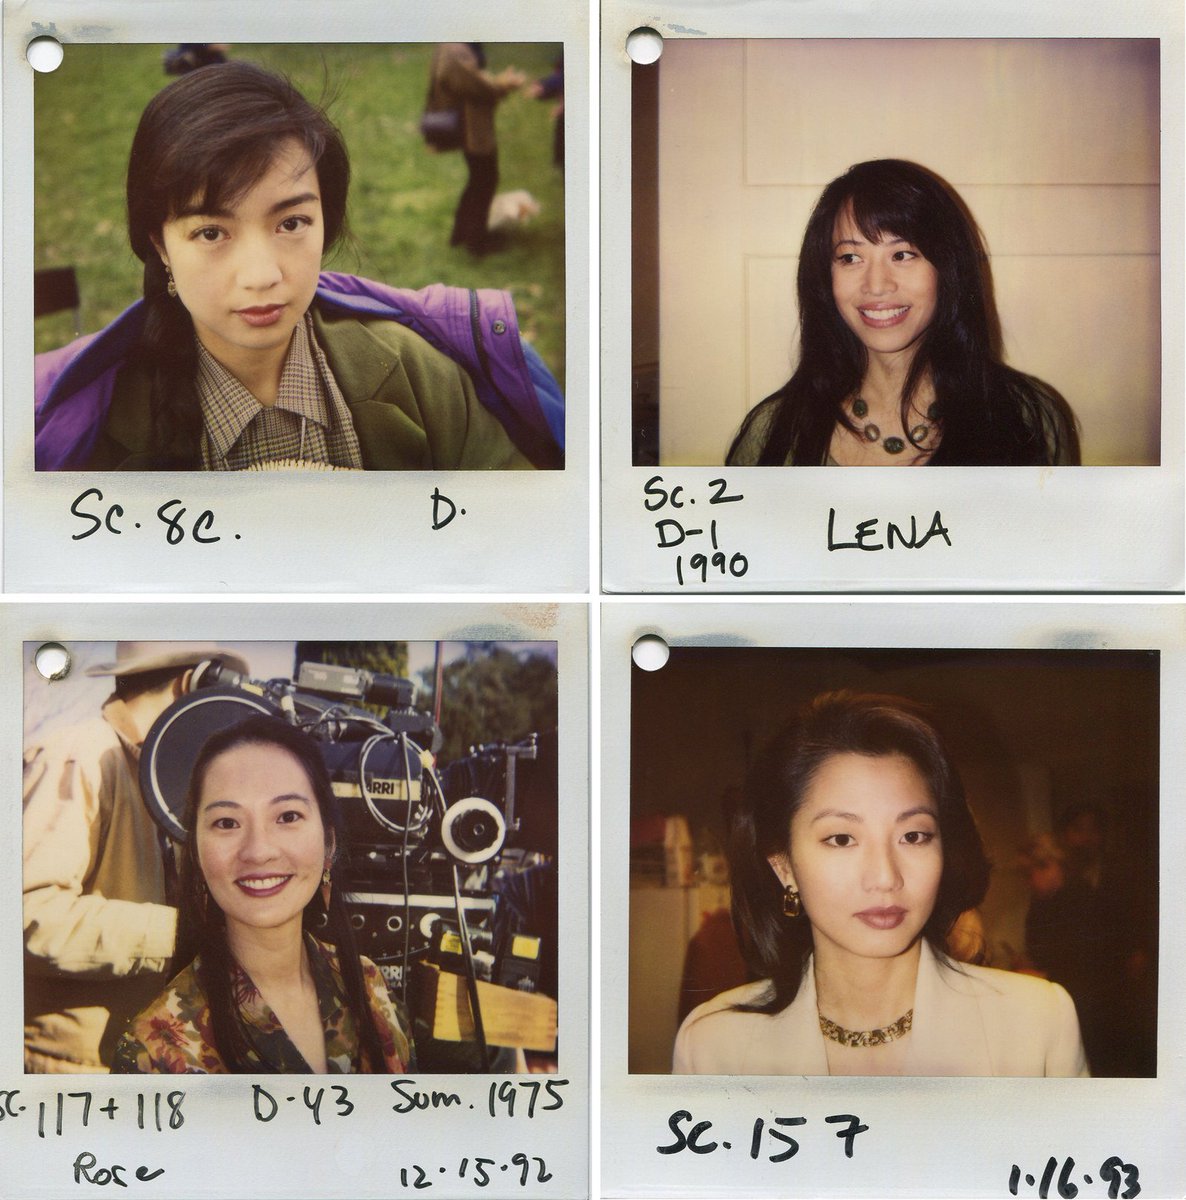 I love these polaroids of the "daughters" of The Joy Luck Club! 